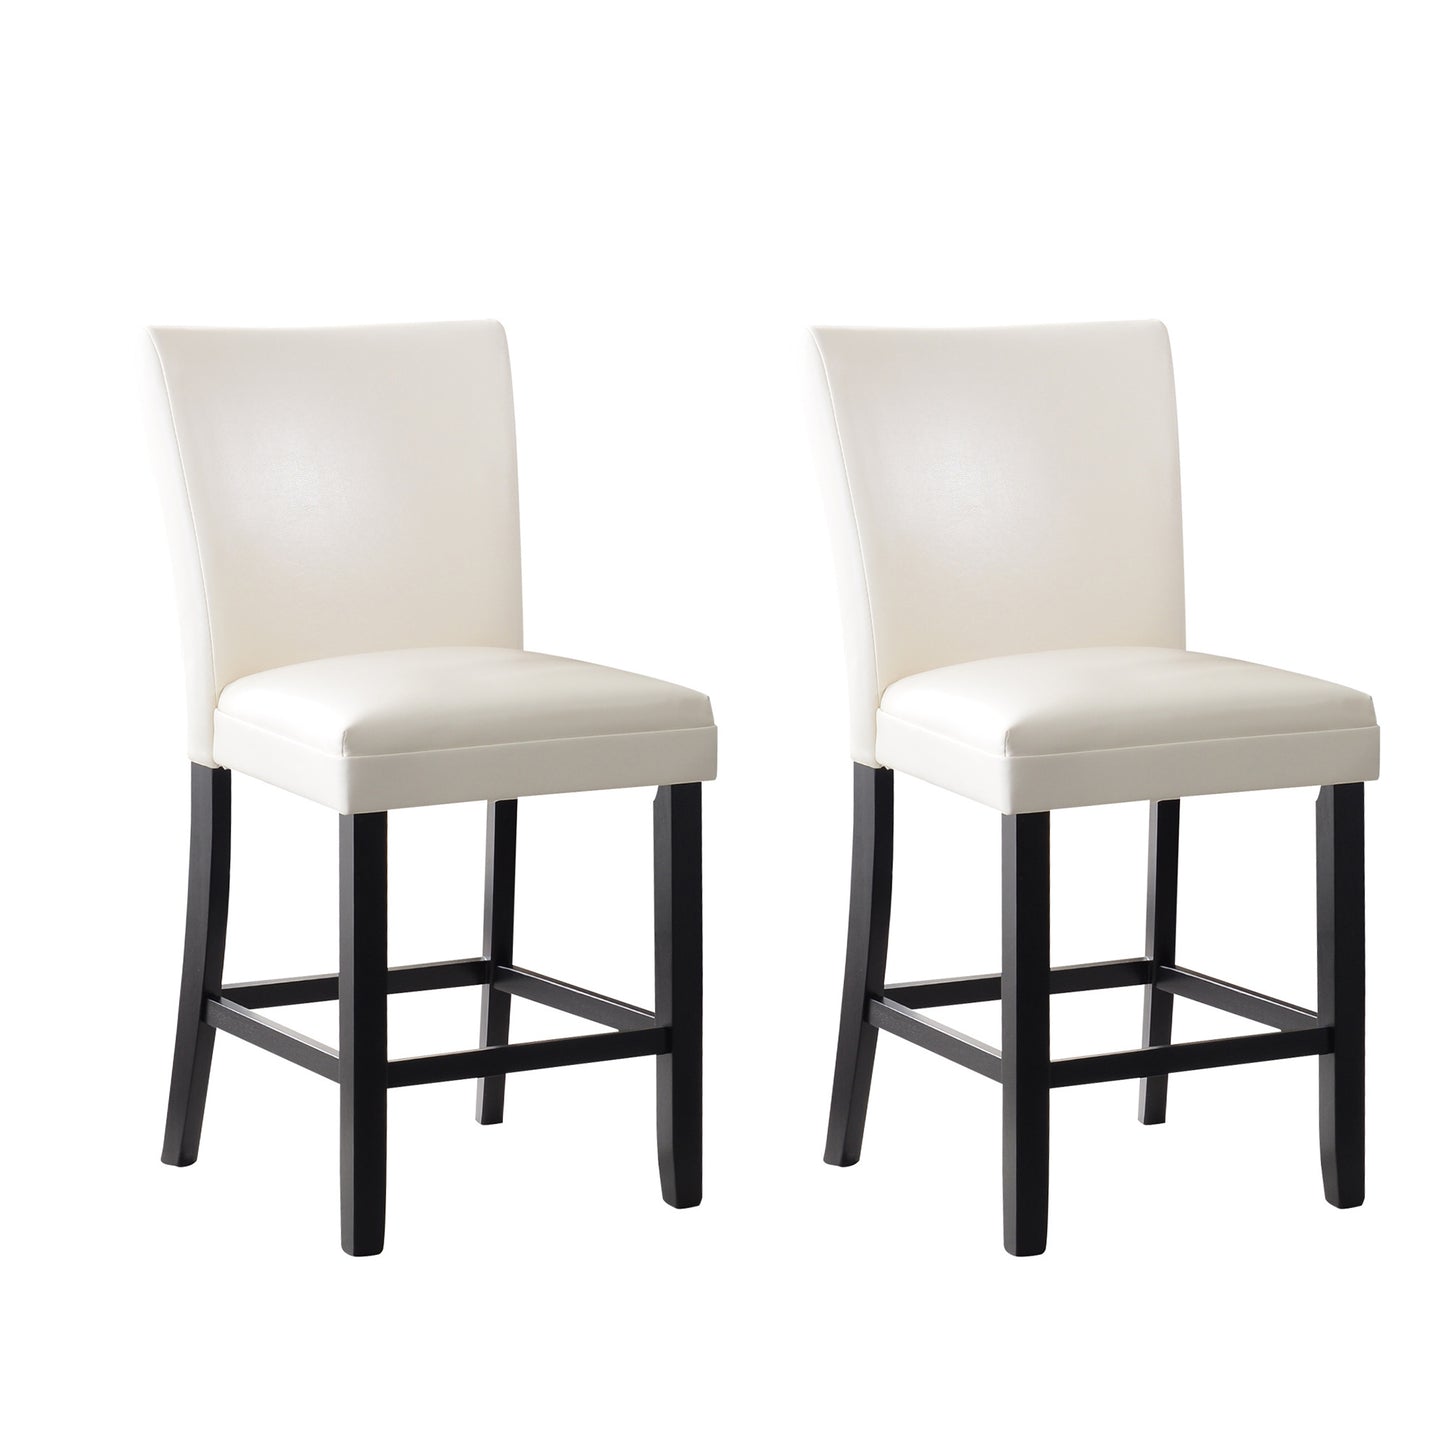 Solid Wood High elasticity Counter Stool Set of 2 - White